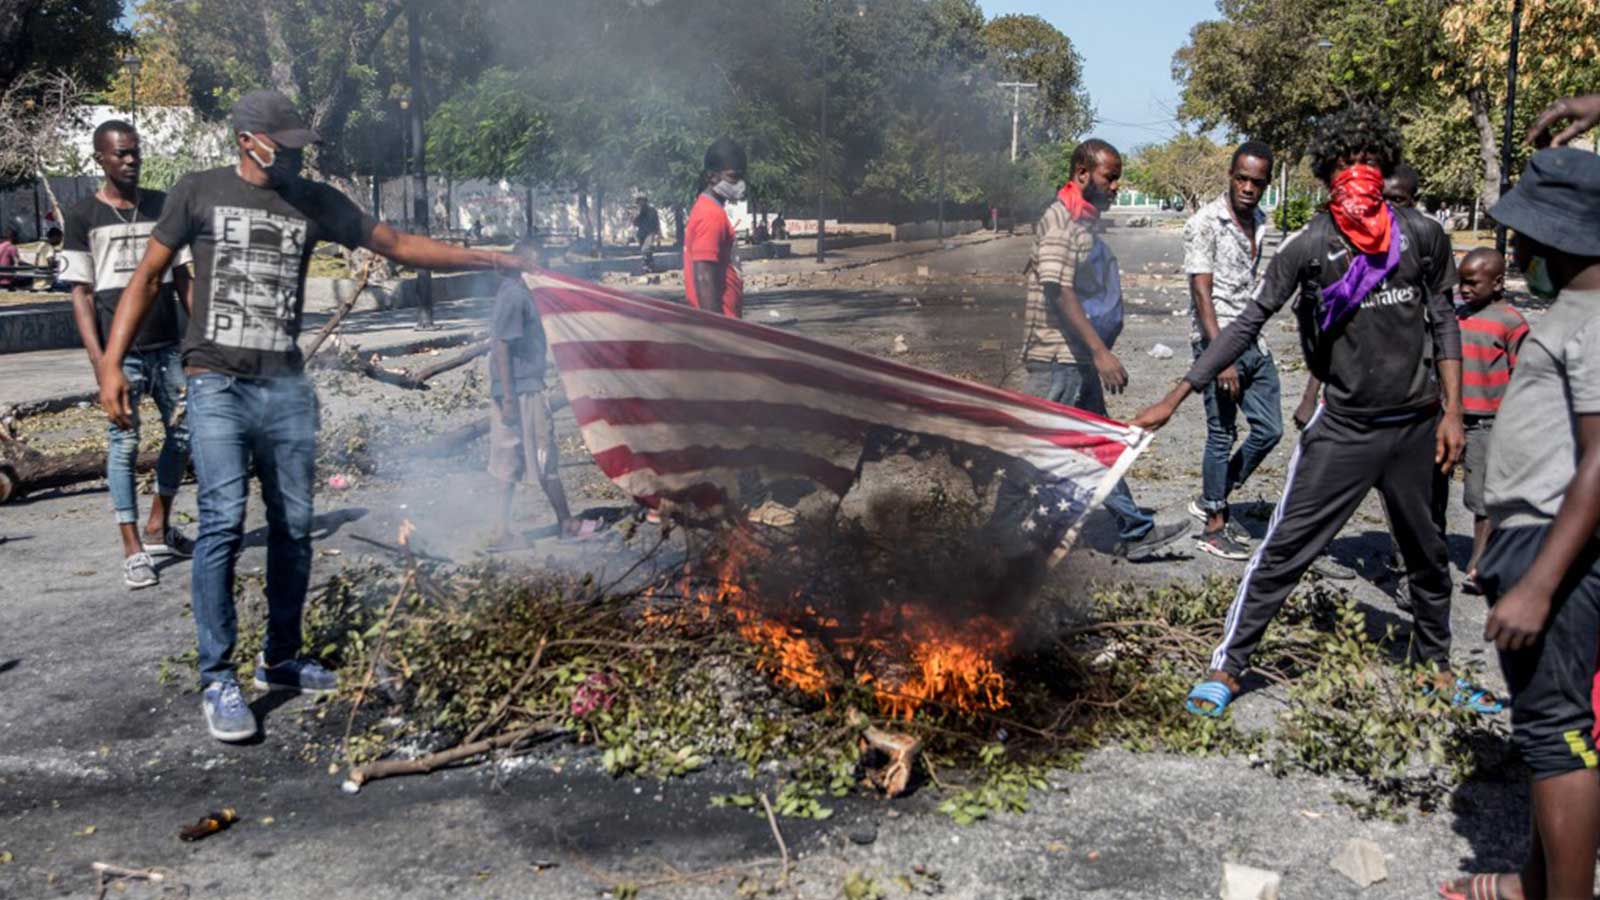 White Supremacy and Western Imperialism Is at Root of Haiti’s Continuing Struggles